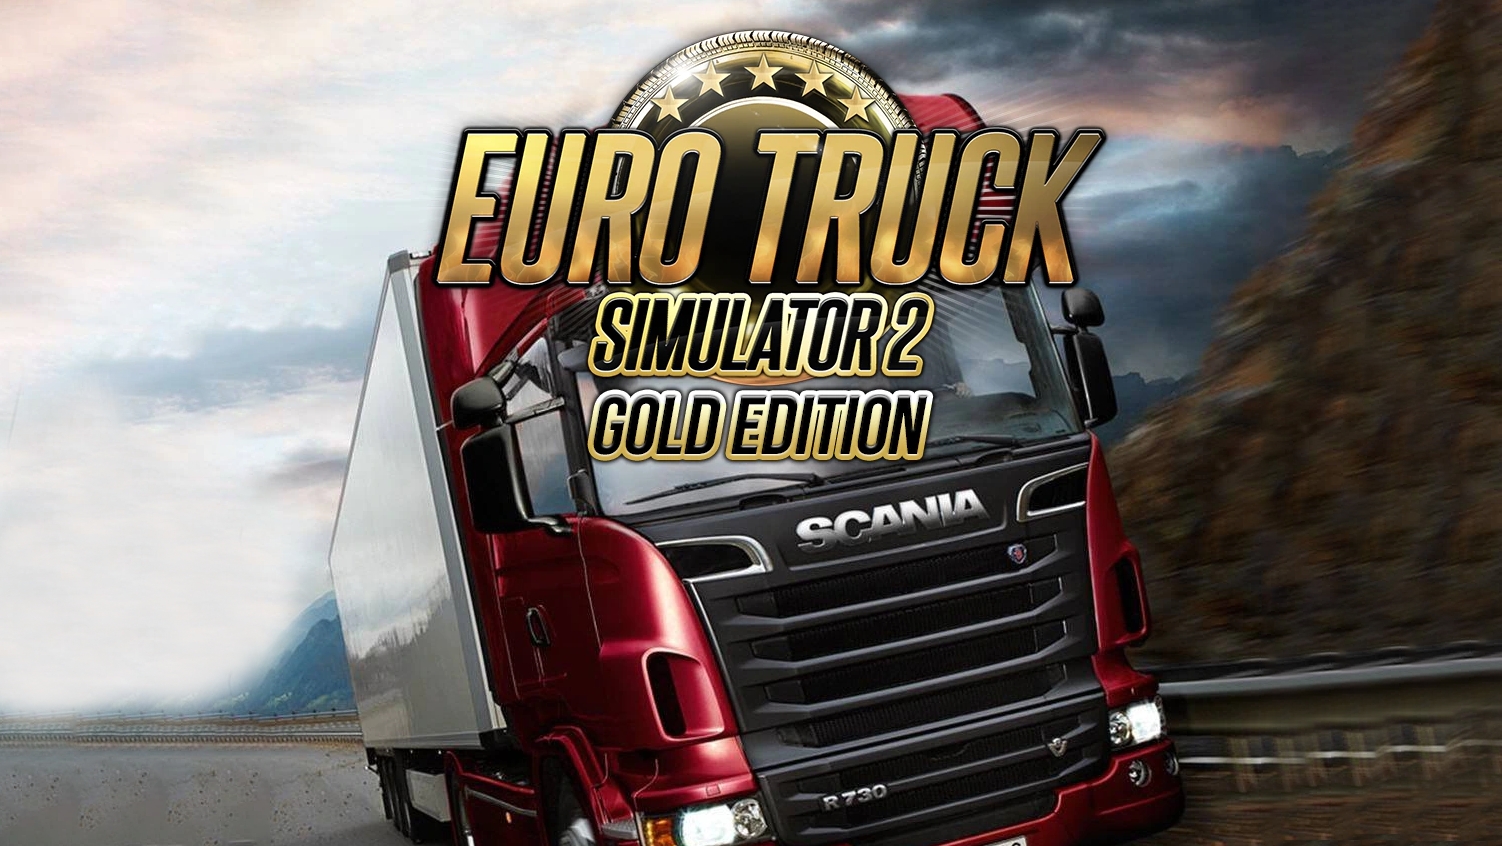 https://gaming-cdn.com/images/products/2309/orig/euro-truck-simulator-2-gold-edition-gold-edition-pc-mac-jeu-steam-cover.jpg?v=1699955287